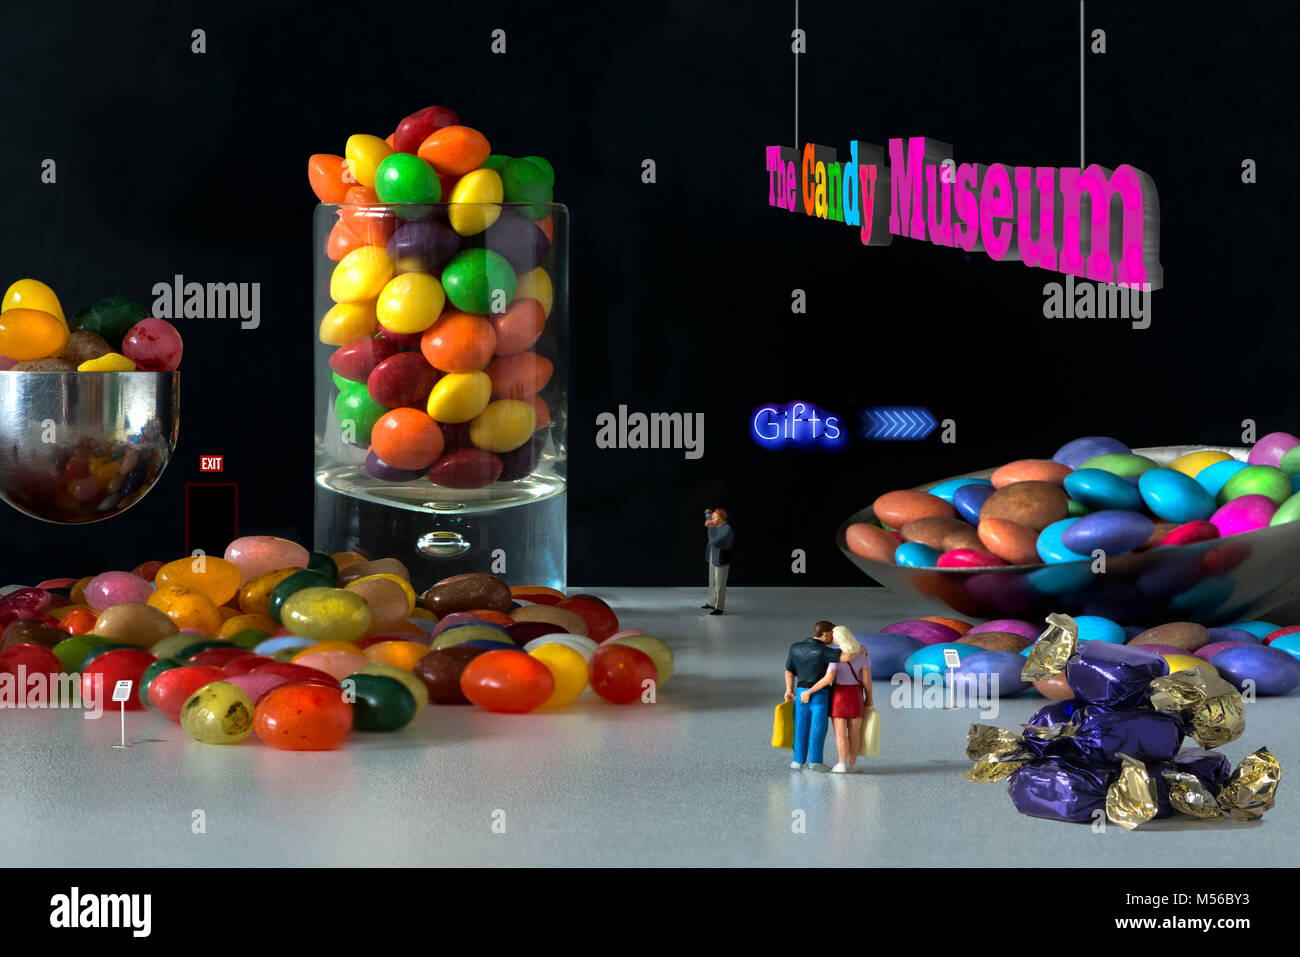 Die Candy Museum Stockfoto